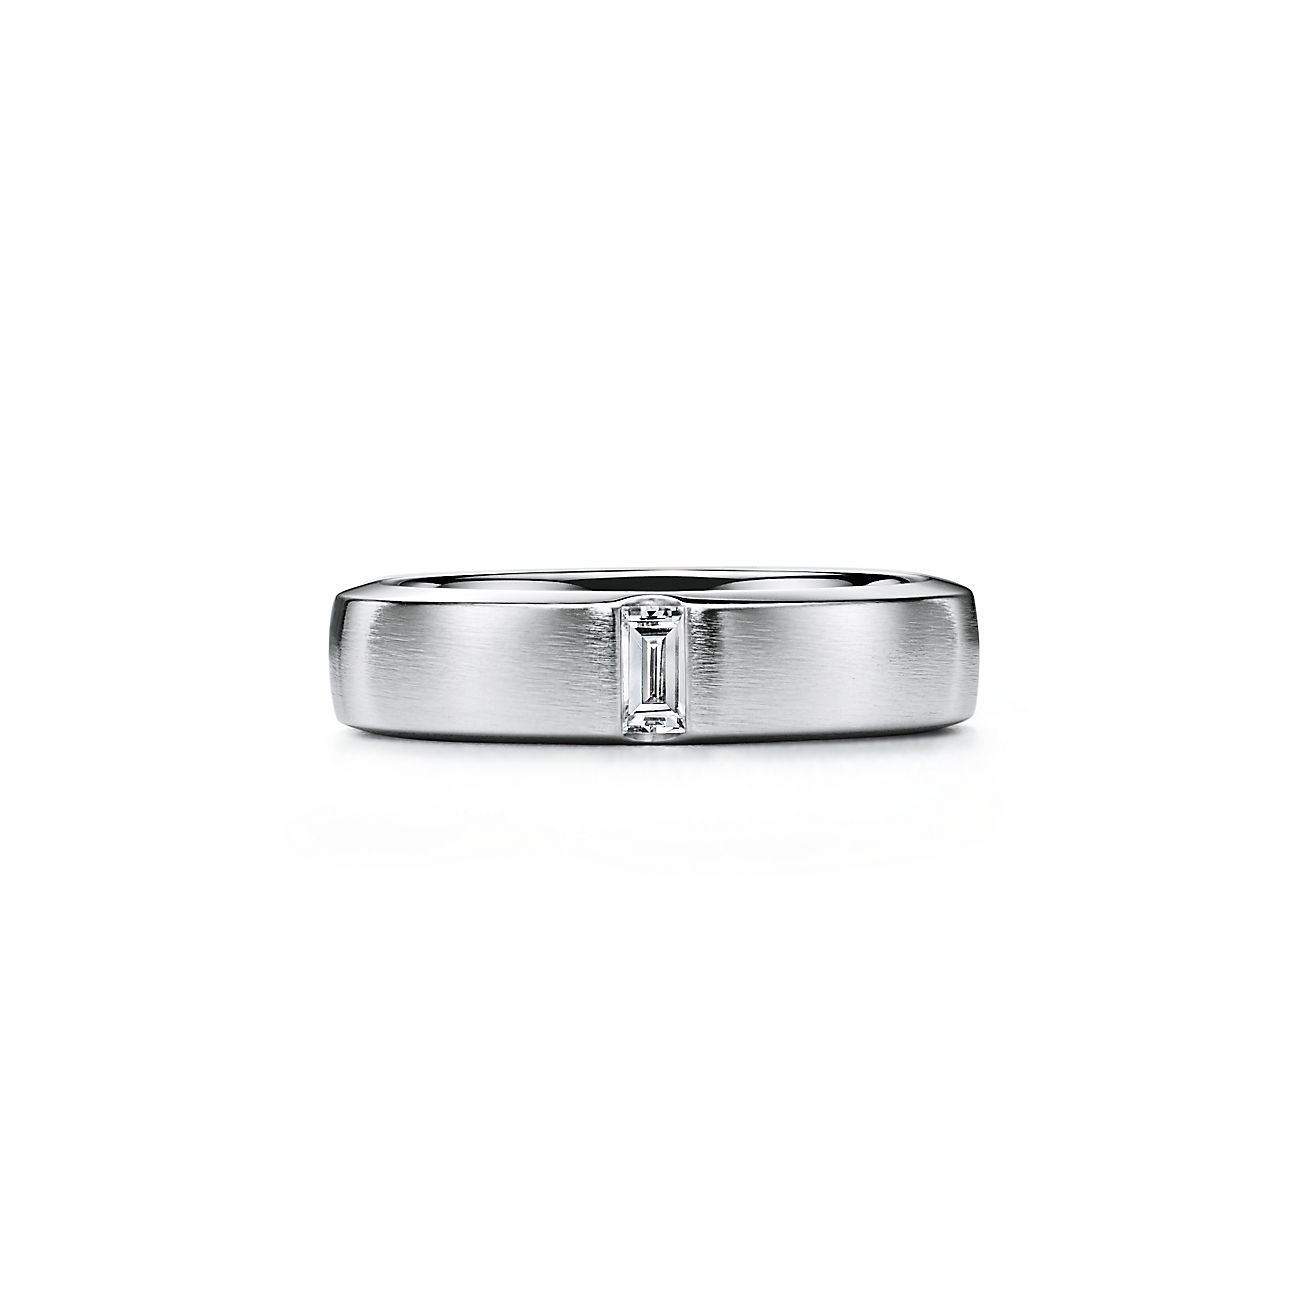 Tiffany Essential Band satin finish ring in platinum with a 